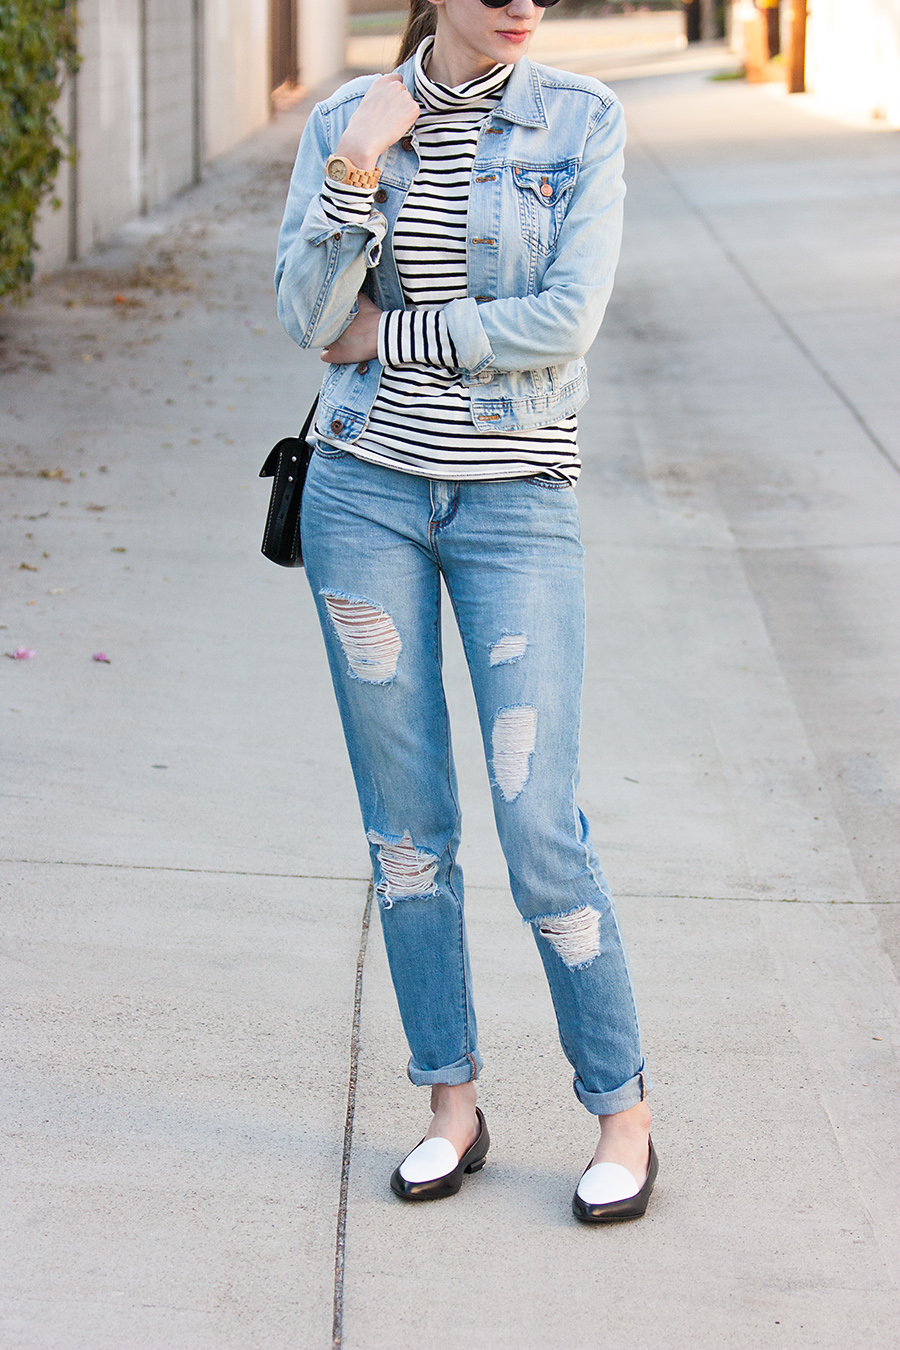 Ripped Boyfriend Jeans, Everlane Loafers